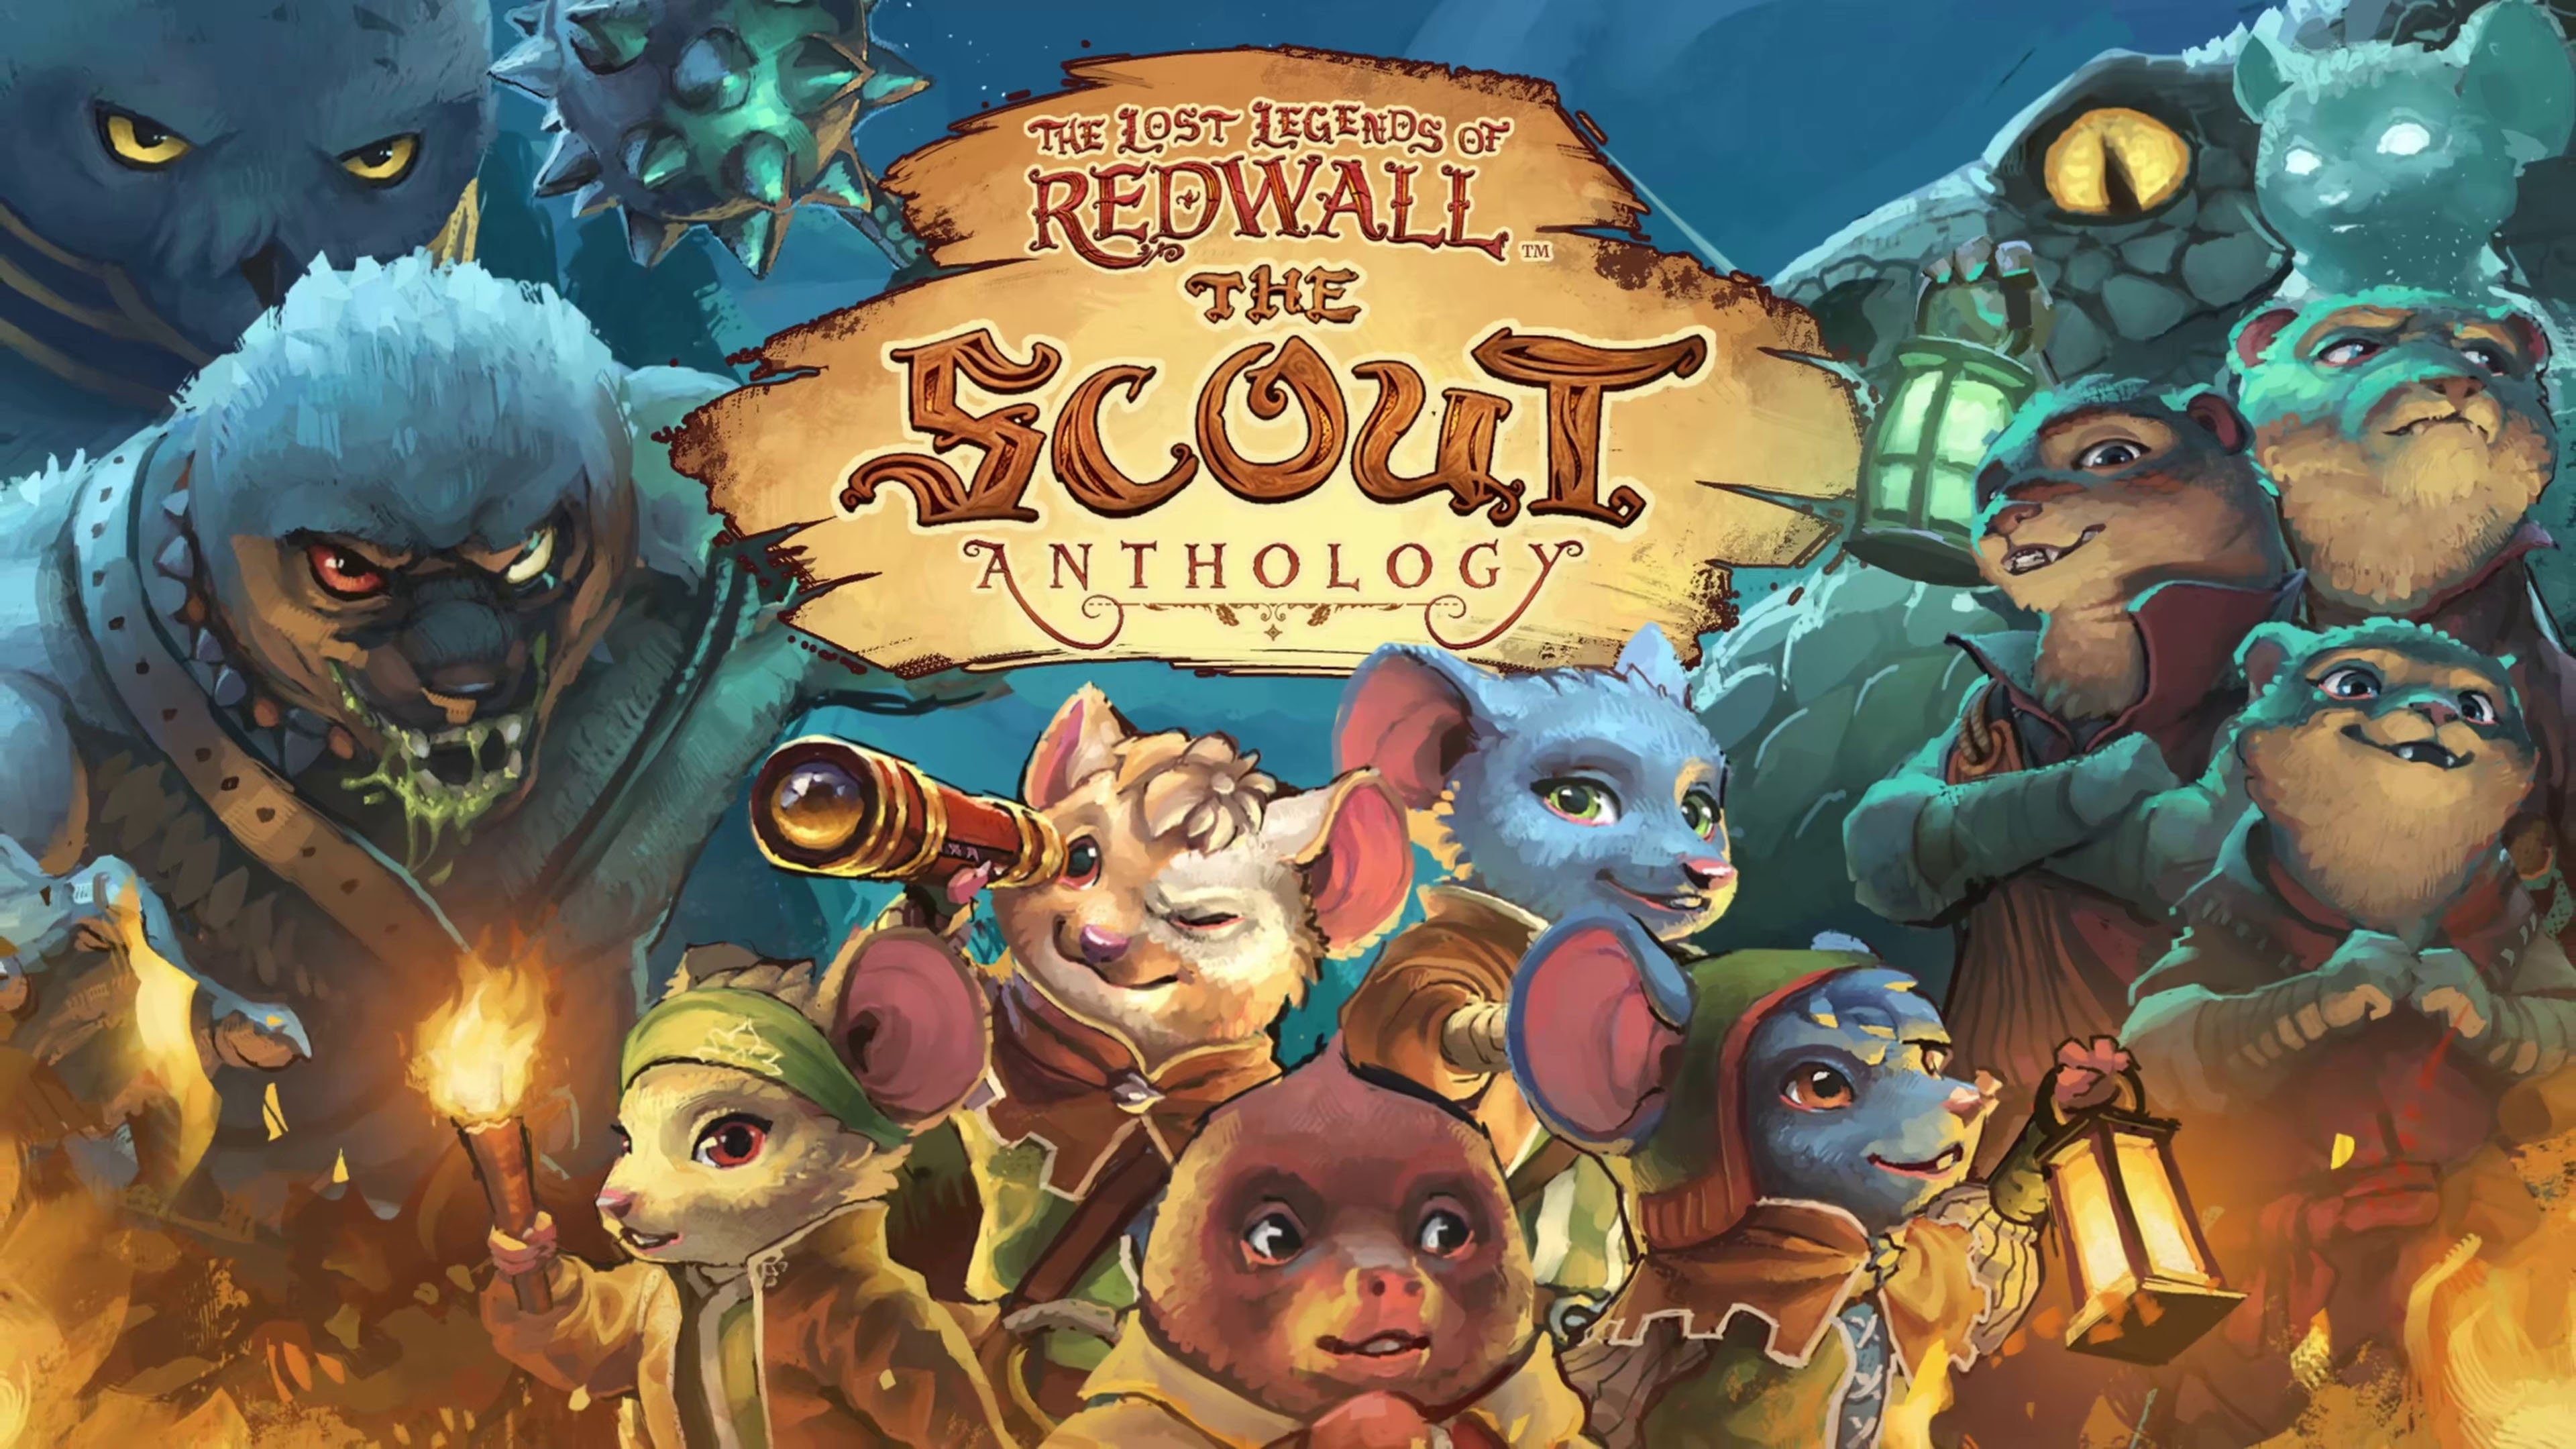 The Lost Legends of Redwall: The Scout Anthology aangekondigd voor PS5, Xbox Series, PS4, Xbox One en pc